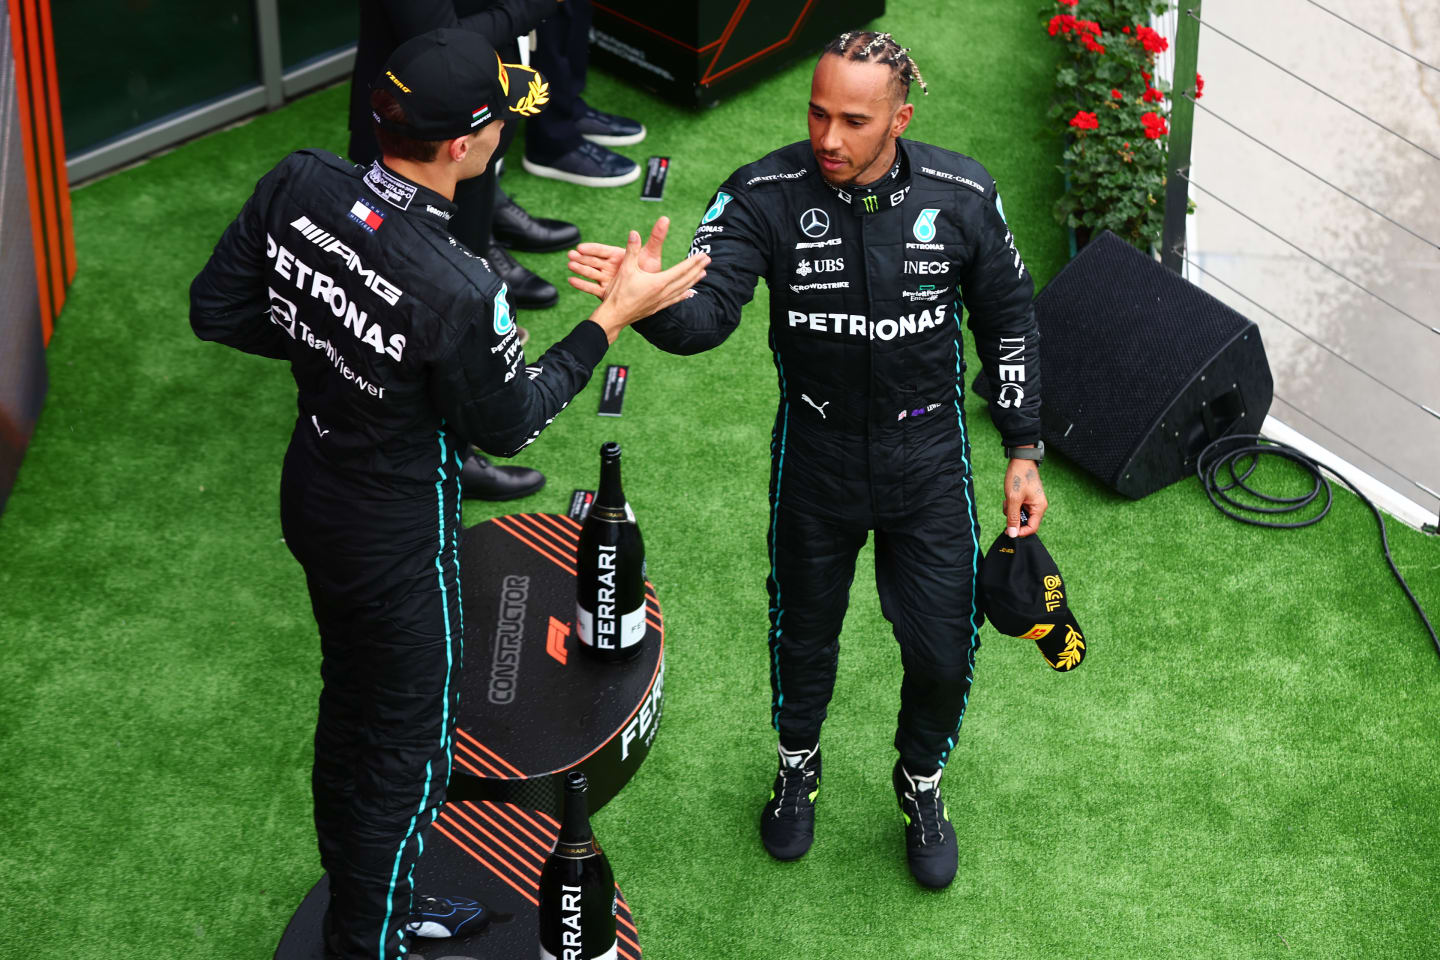 BUDAPEST, HUNGARY - JULY 31: Second placed Lewis Hamilton of Great Britain and Mercedes and Third